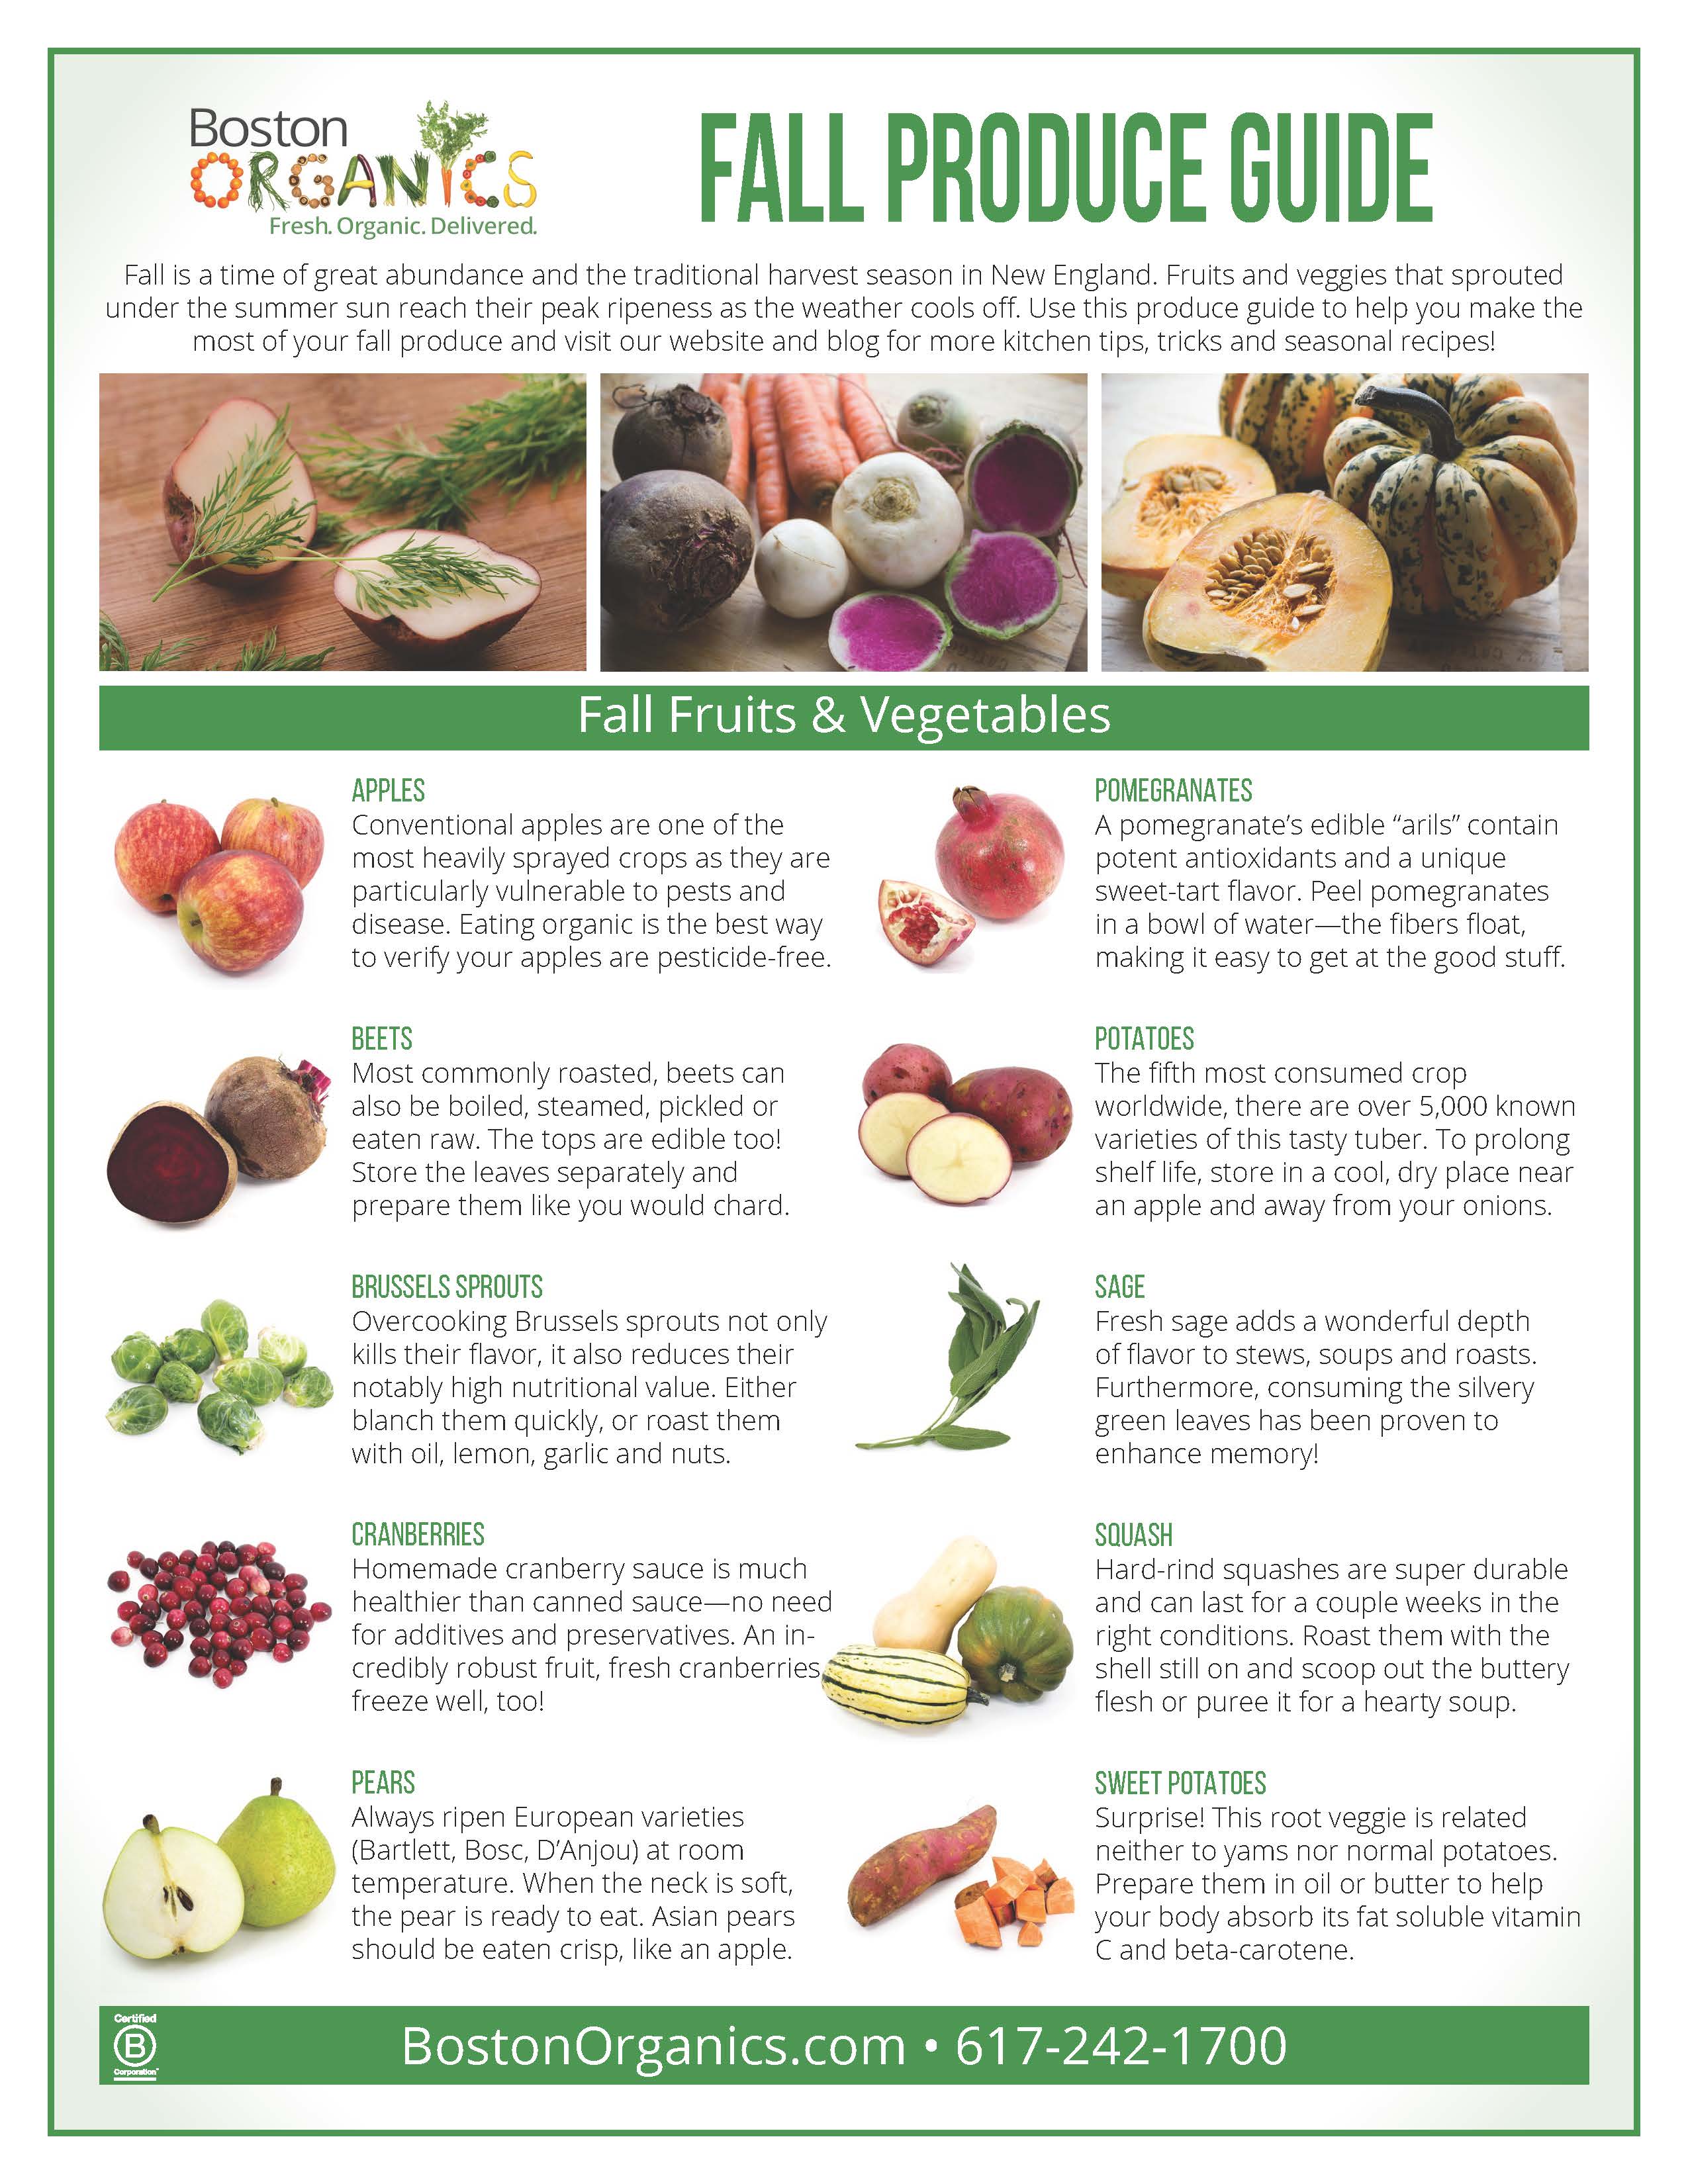 2017 Fall Produce Guide_1_Page_1.jpg